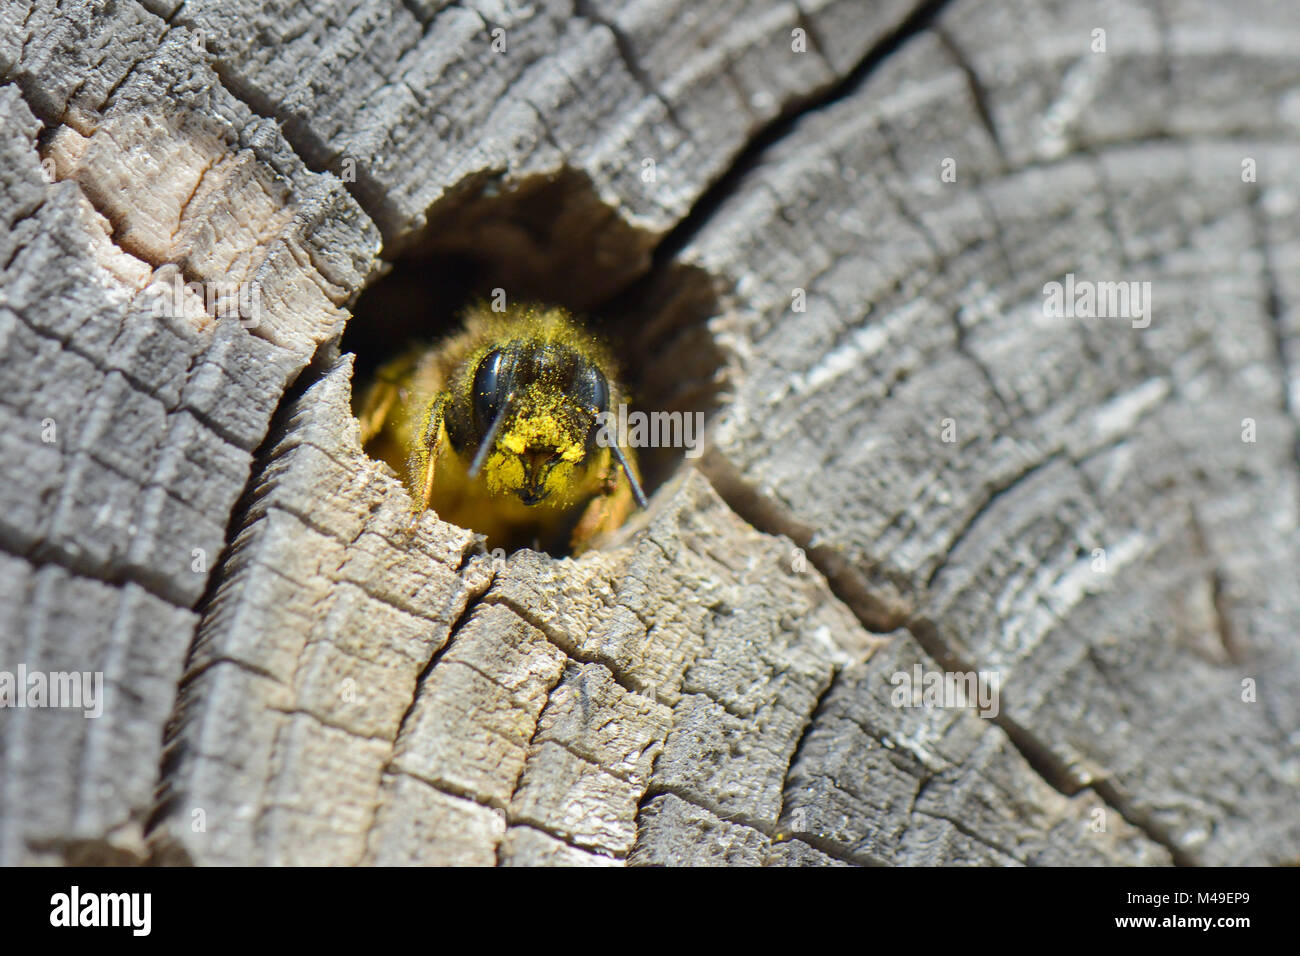 Red mason bee (Osmia rufa) female emerging from her nest hole in a drilled log within an insect hotel after provisioning a brood cell with pollen, Gloucestershire garden, UK, April. Stock Photo